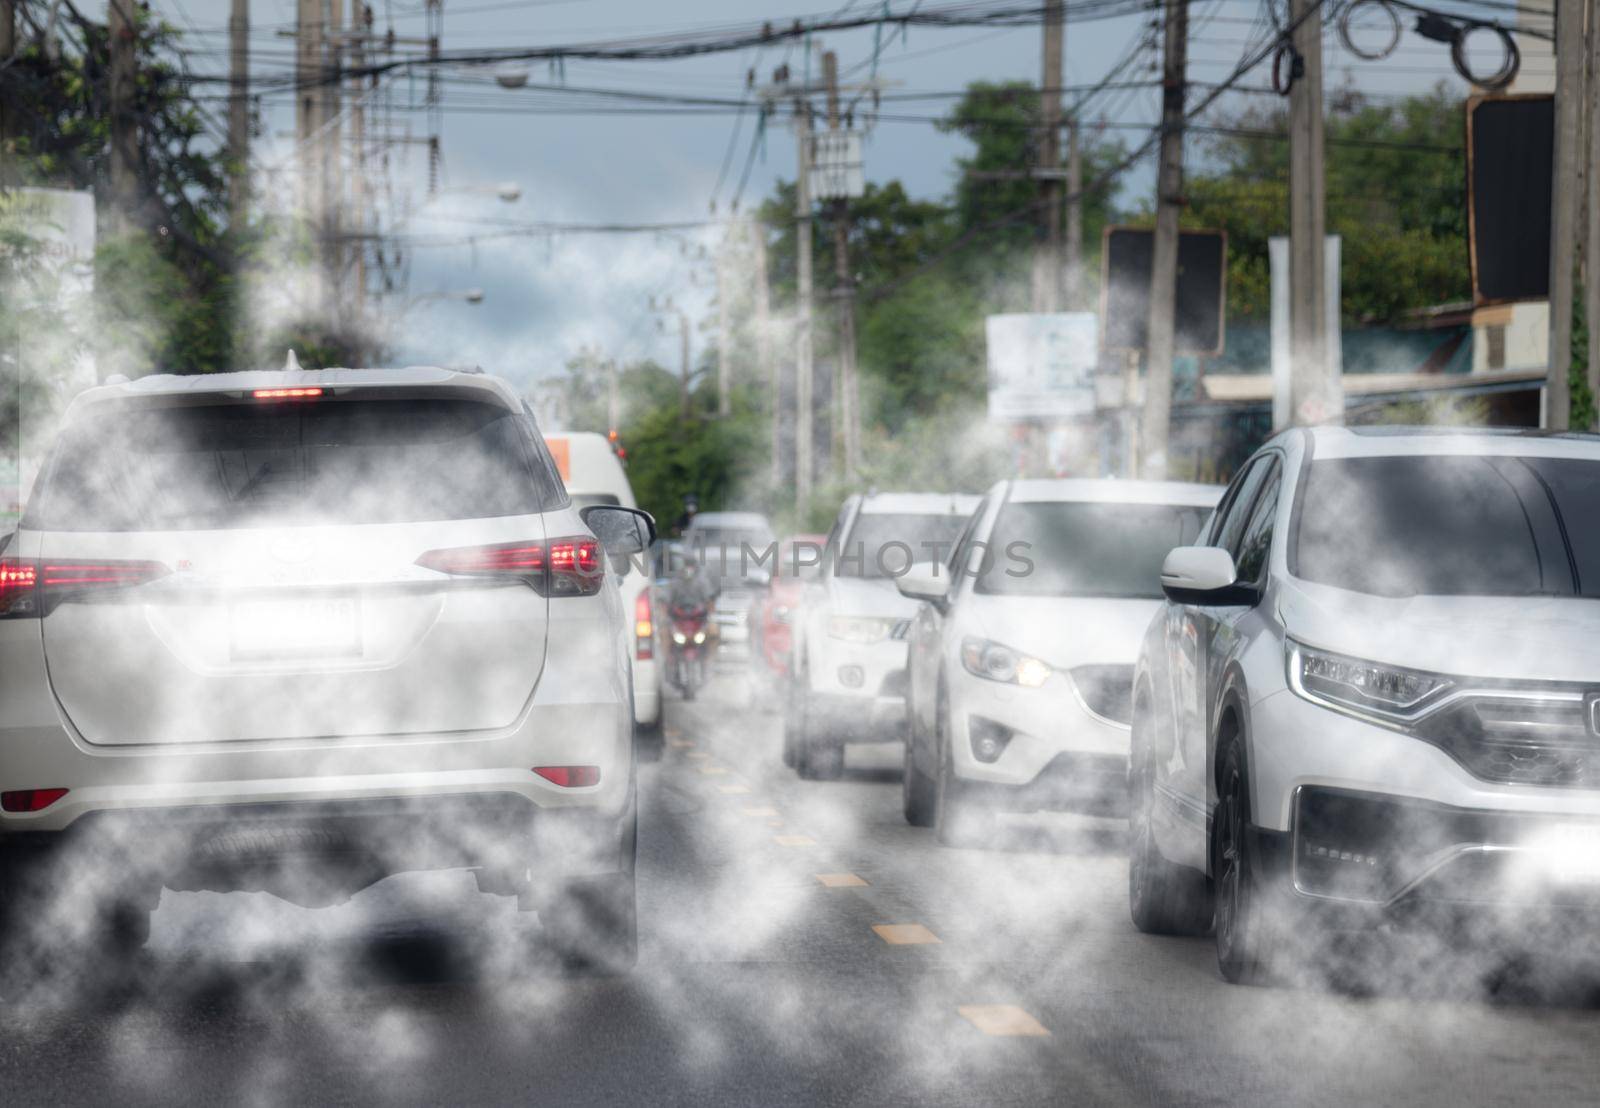 Car exhaust fumes during traffic jams on the road cause environmental emissions. by aoo3771